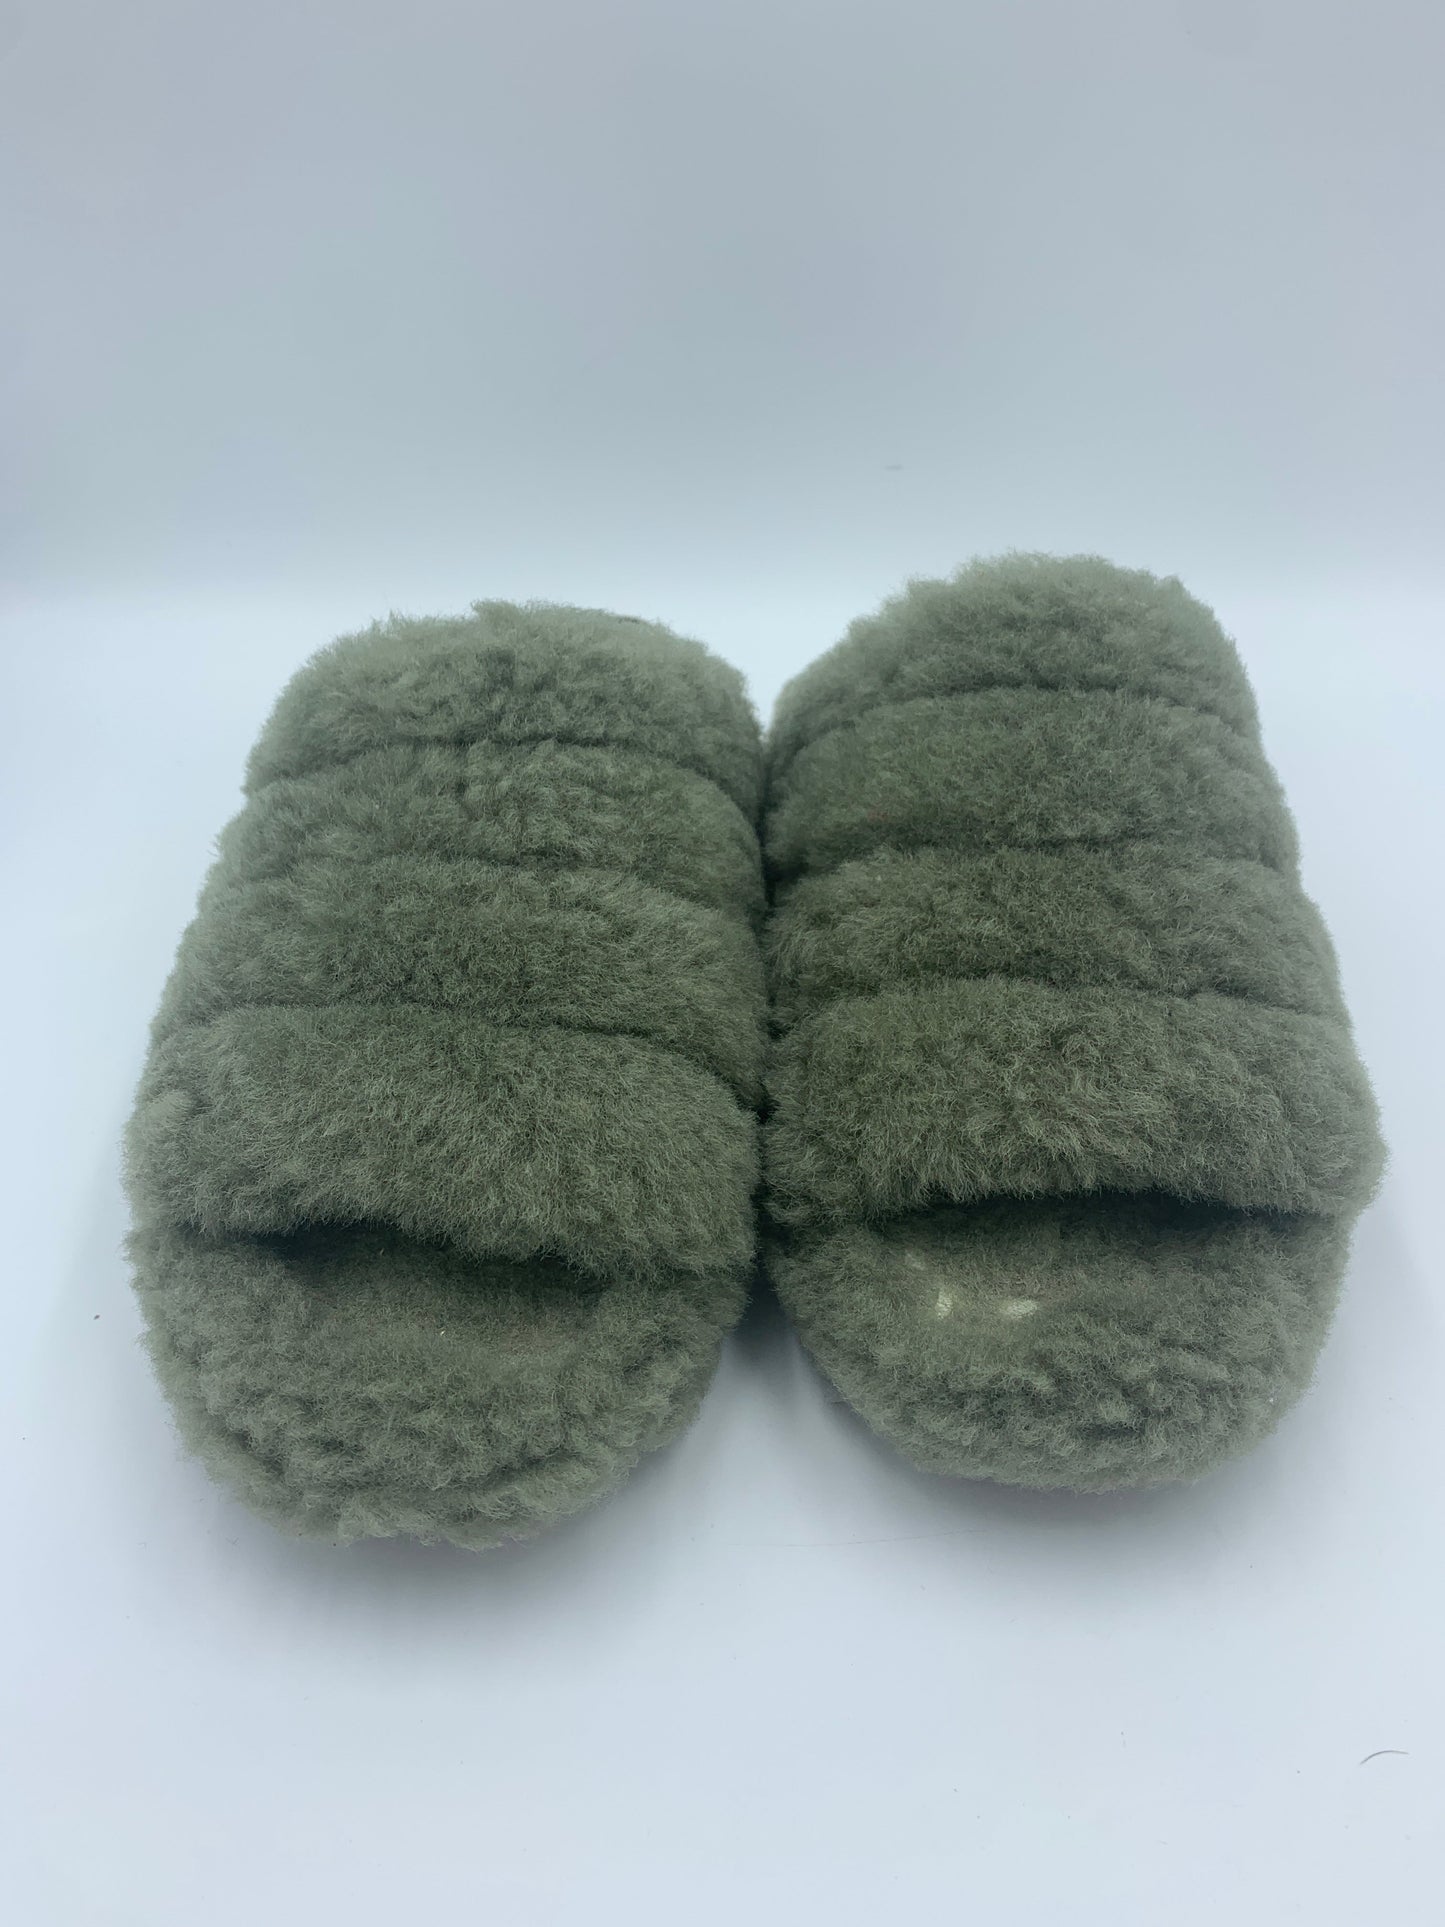 Ugg Slippers /  Green Shoes  Size 8